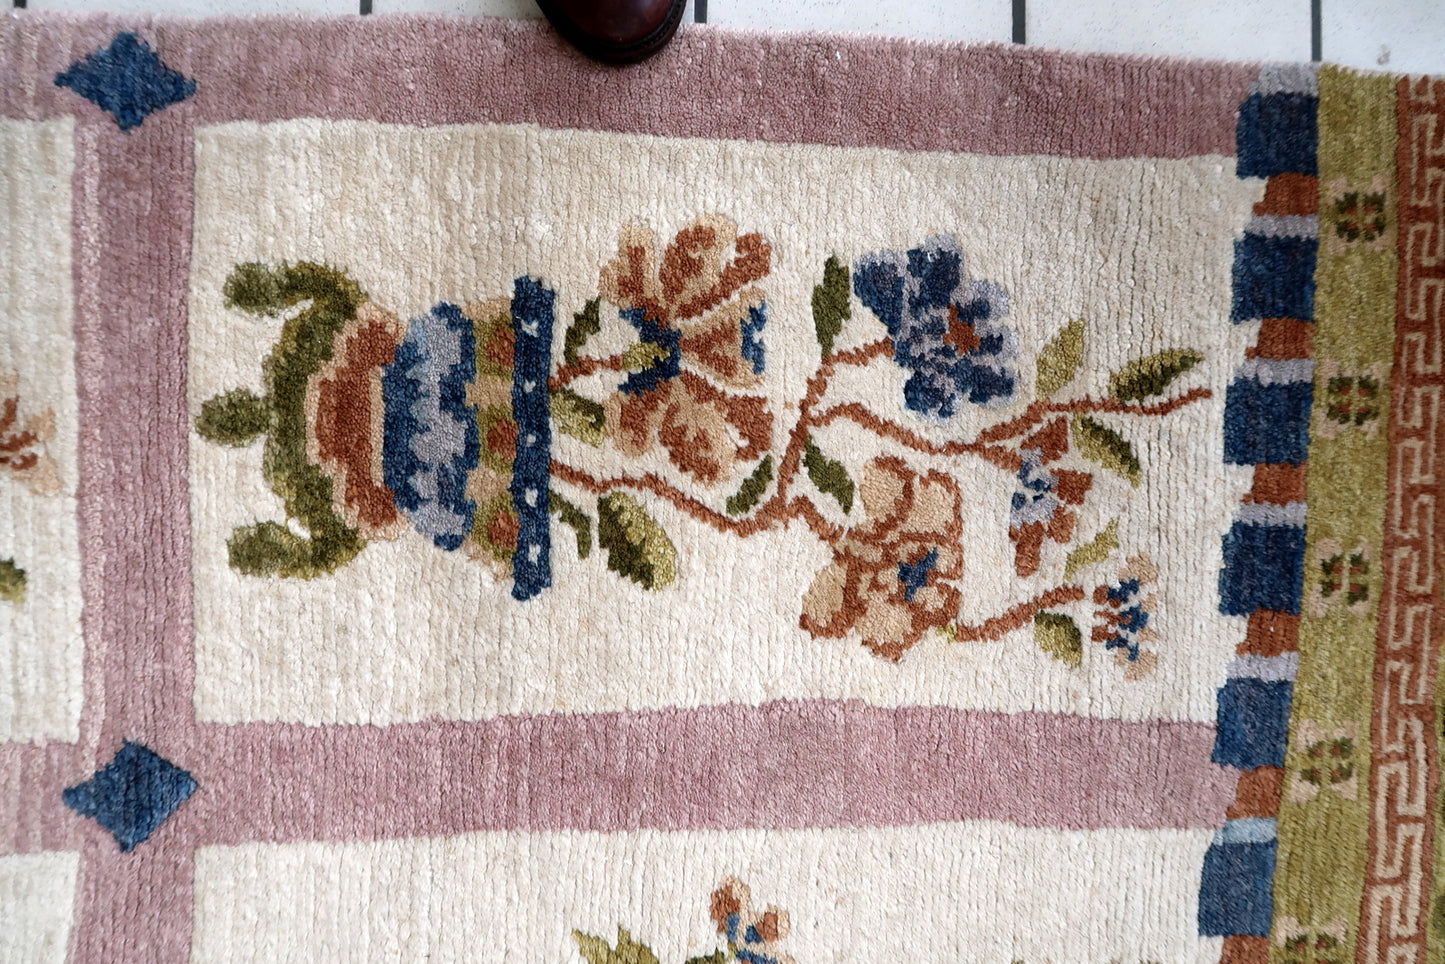 Base Color of Rug in Off-White or Beige, with Decorative Elements in Blues, Reds, Greens, and Browns - 1970s